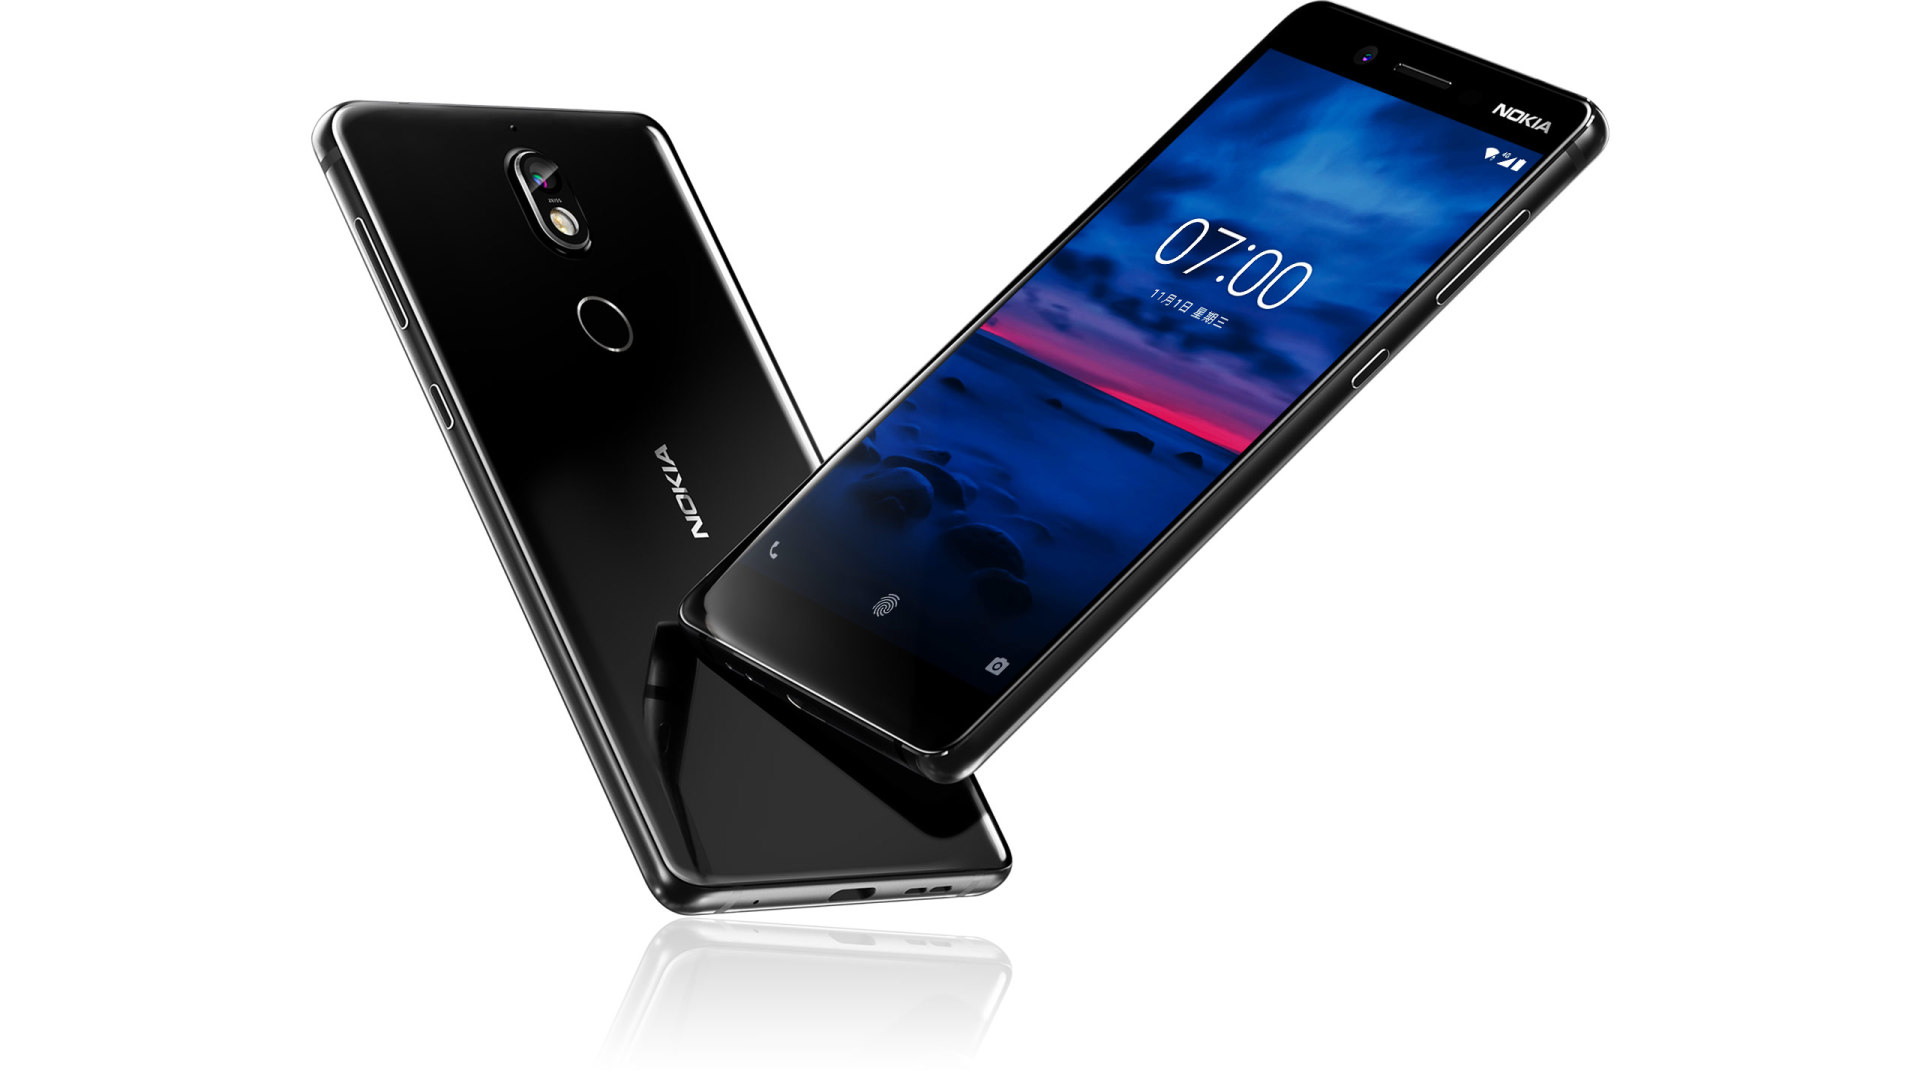 Nokia 7 launched with Snapdragon 630, Carl Zeiss camera 3